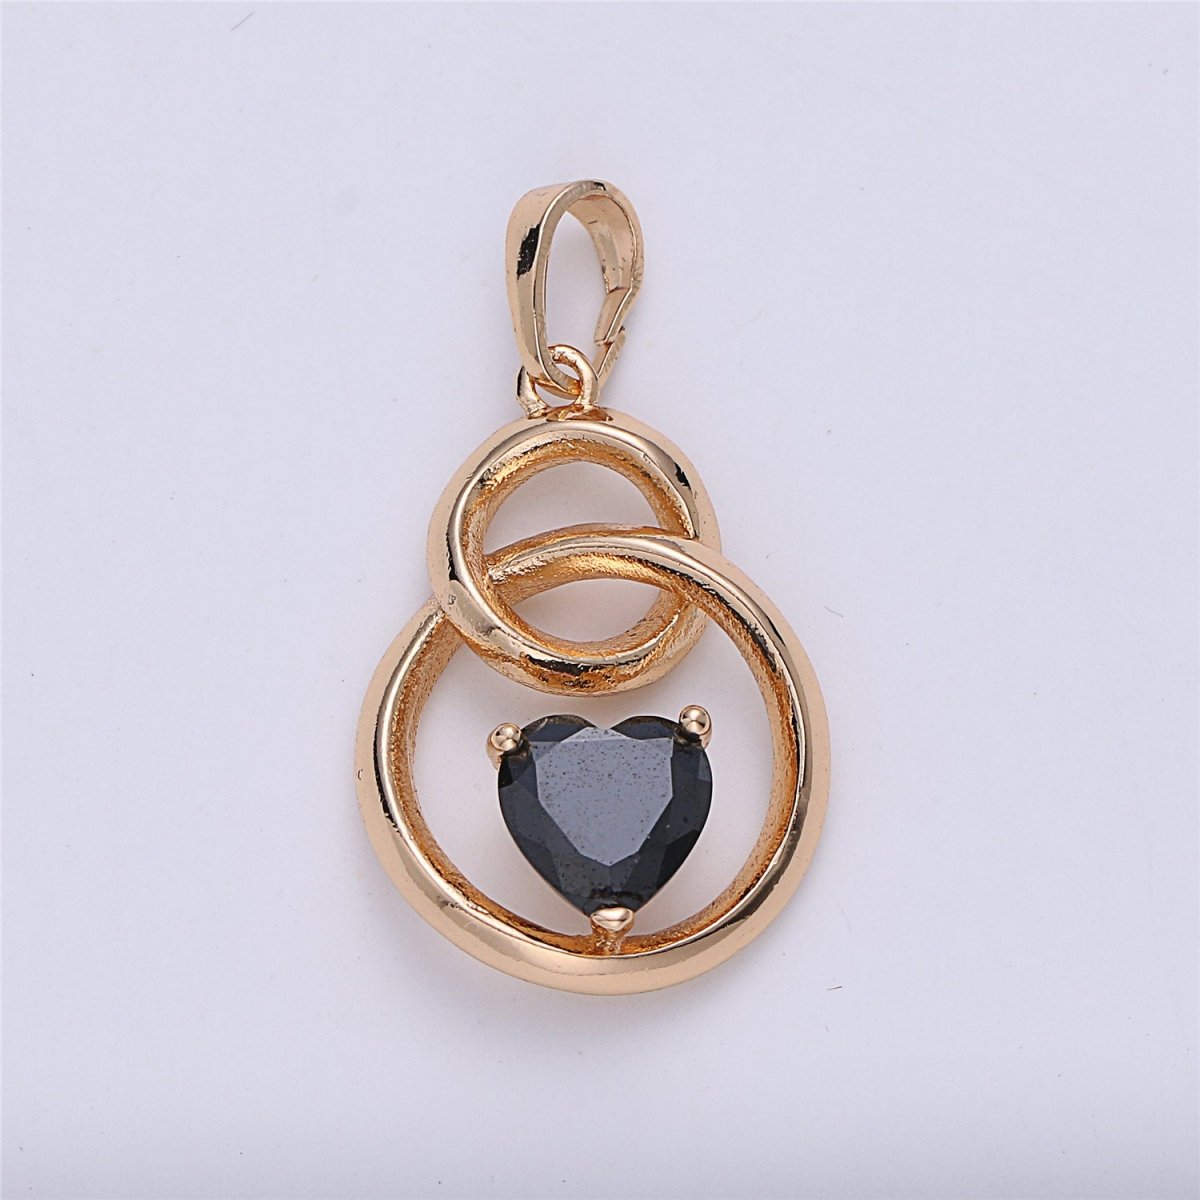 Cubic heart charm 28x16mm 18K gold Filled CZ, Nickel, Lead free Black Blue Red Heart pendant, Unique heart charm for Necklace Earring I-263 - DLUXCA